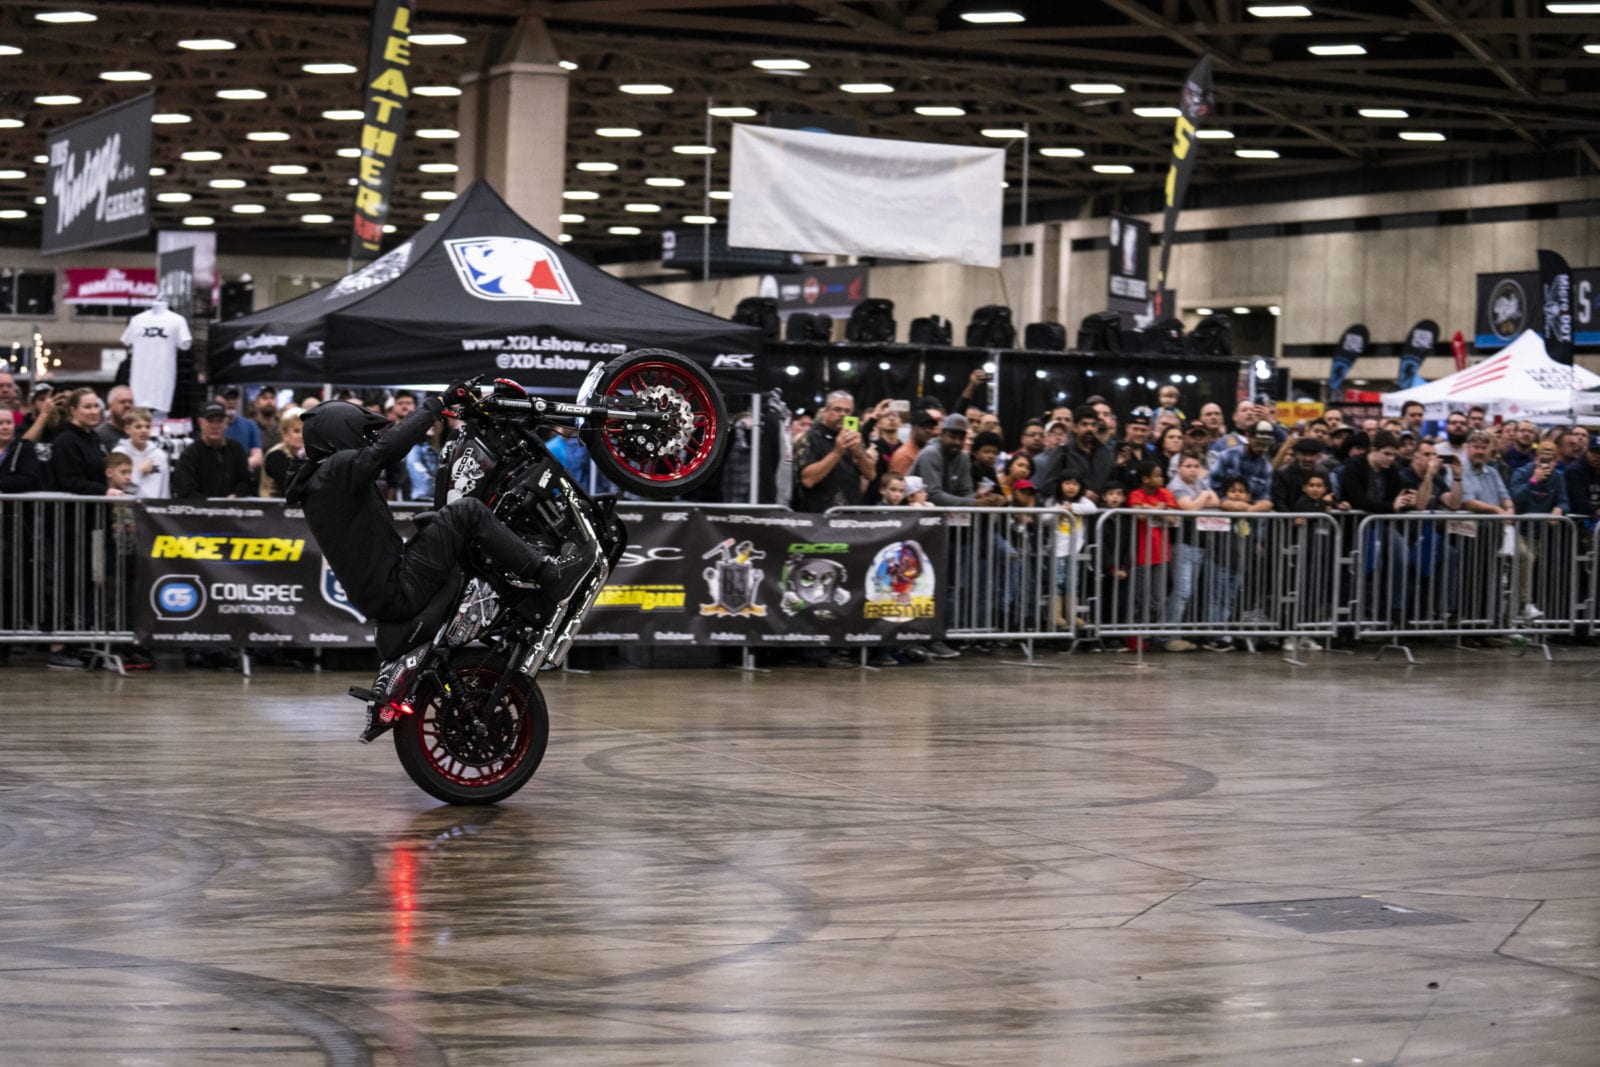 XDL Street Jam storms into Minneapolis for the Motorcycle Shows Tour